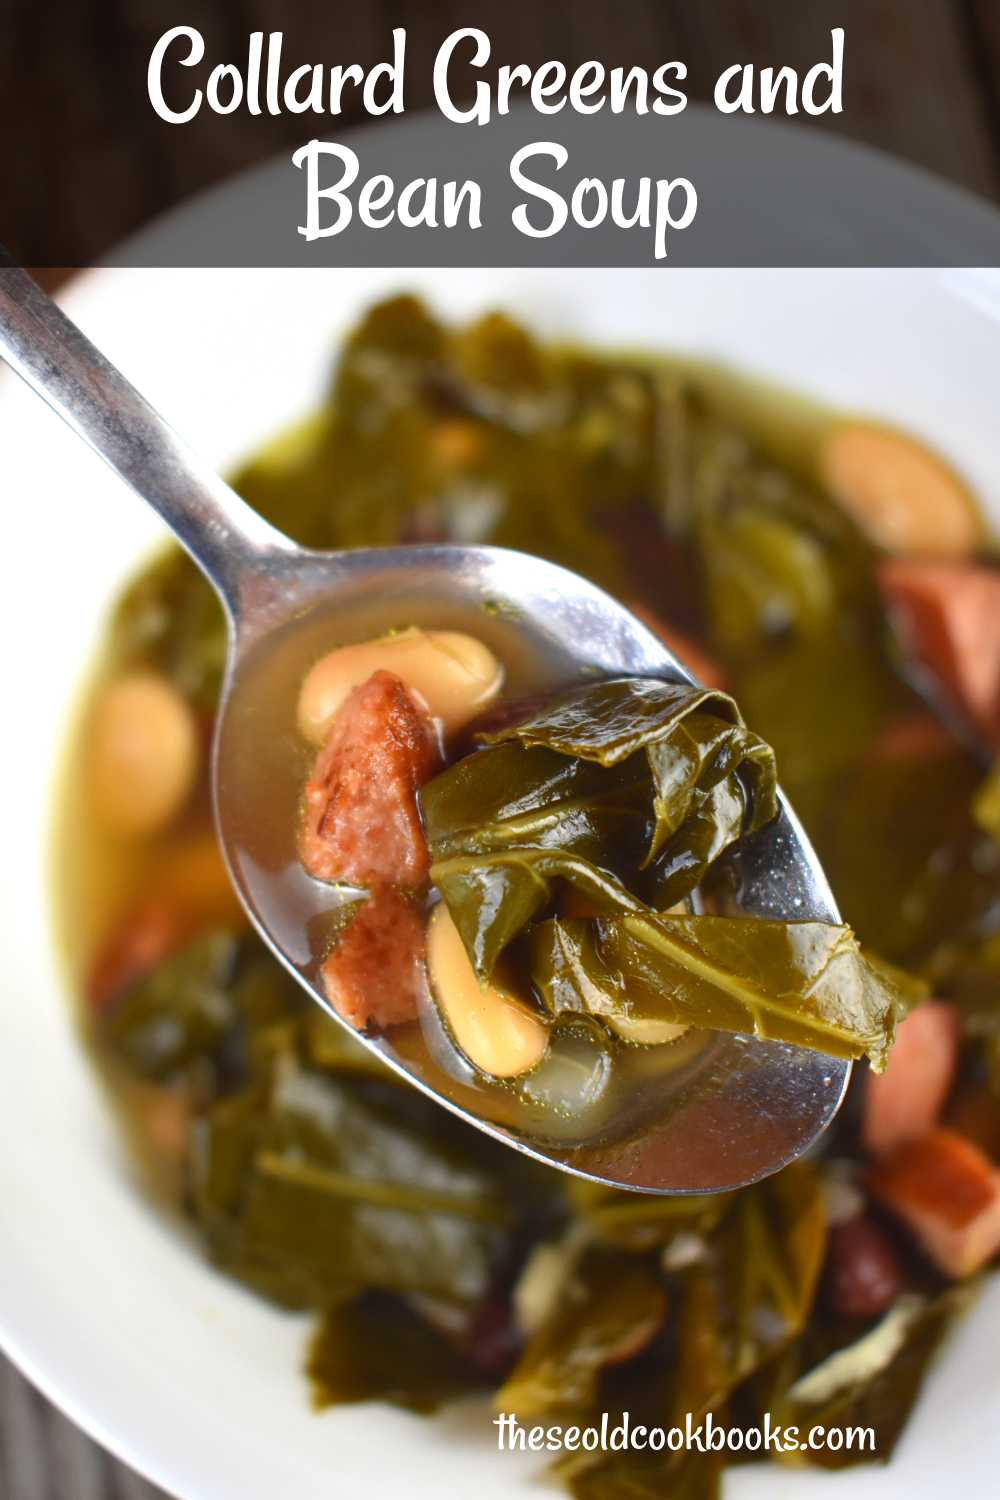 Collard Greens and Bean Soup is a new spin on those classic southern collard greens.  The addition of kielbasa, black beans and Great Northern beans make this healthy vegetable into a full meal.